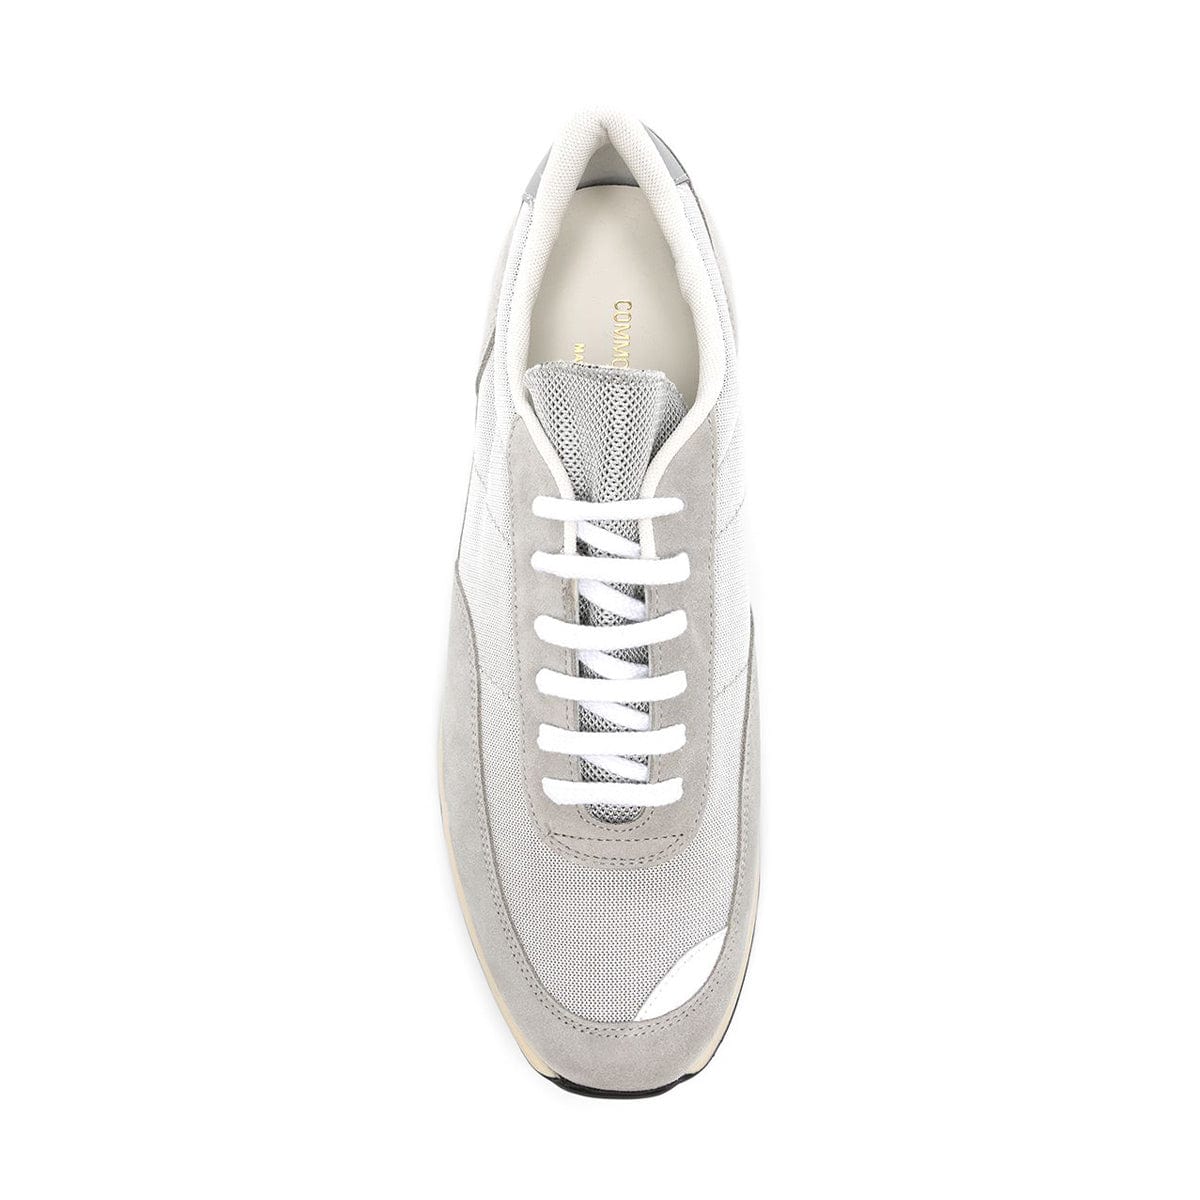 Common Projects Casual TRACK 80 METALLIC